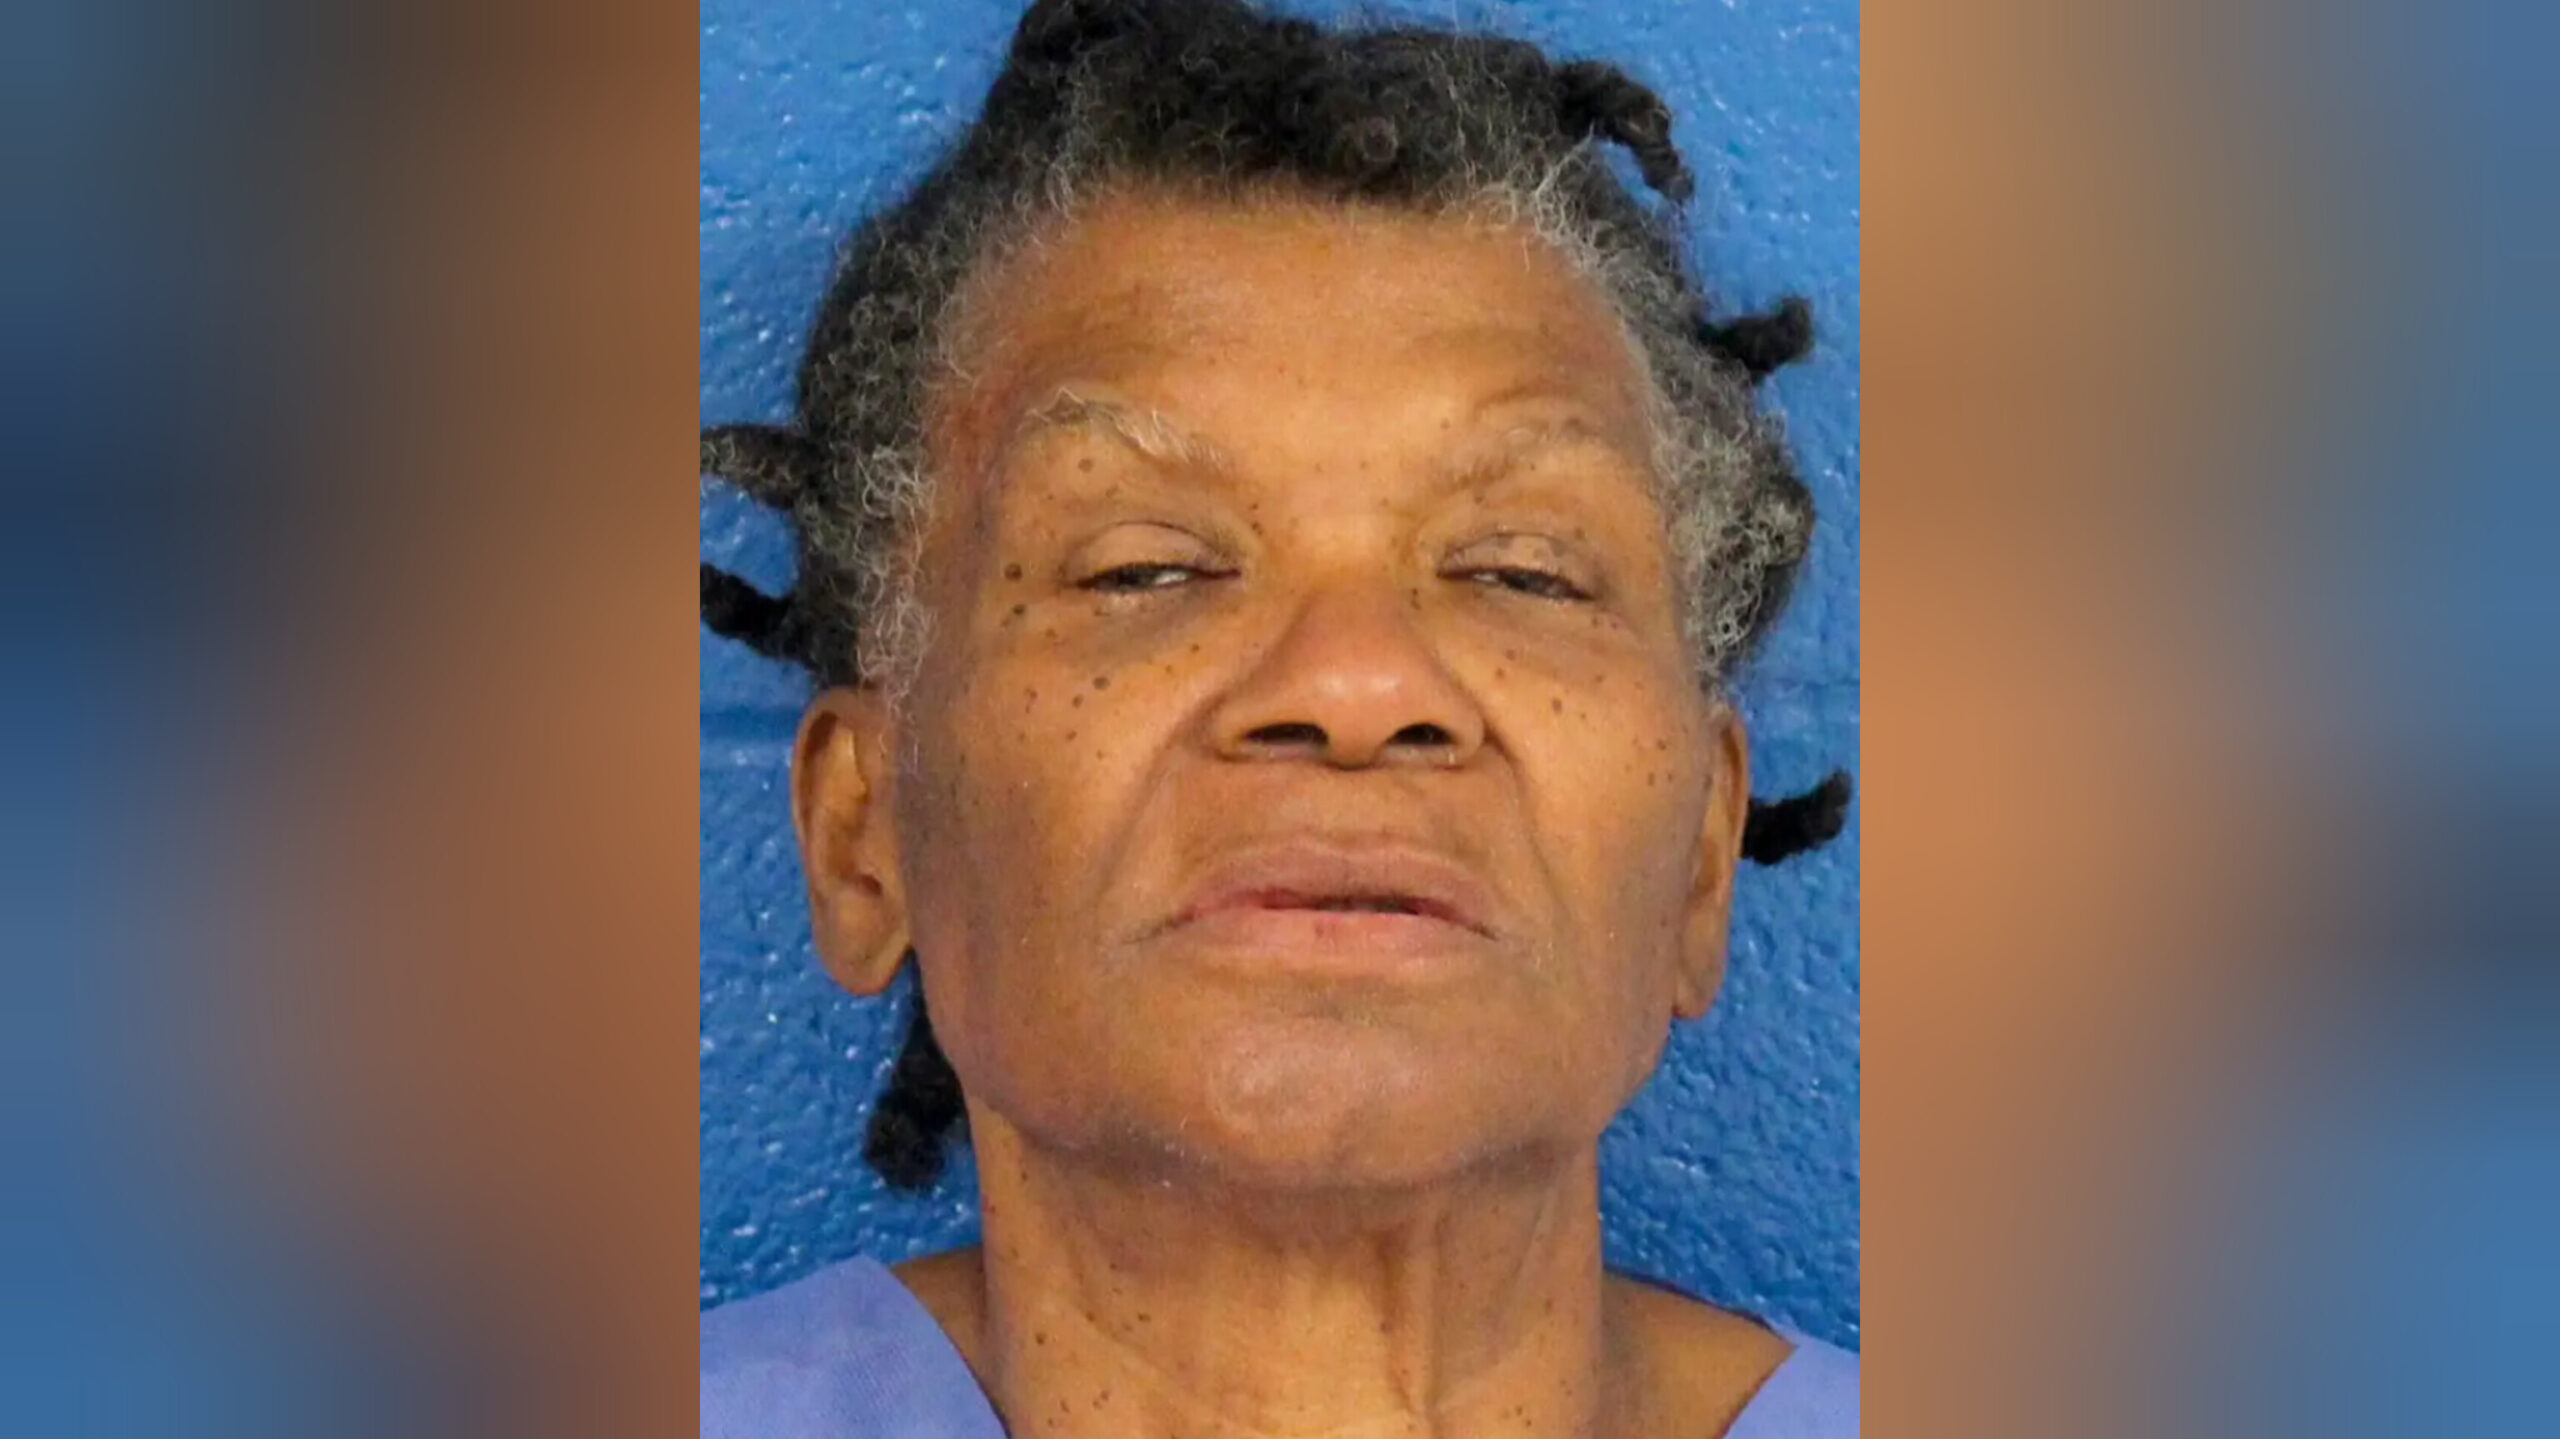 North Carolina Grandmother Charged With Murder For Beating 8 Year Old Granddaughter To Death